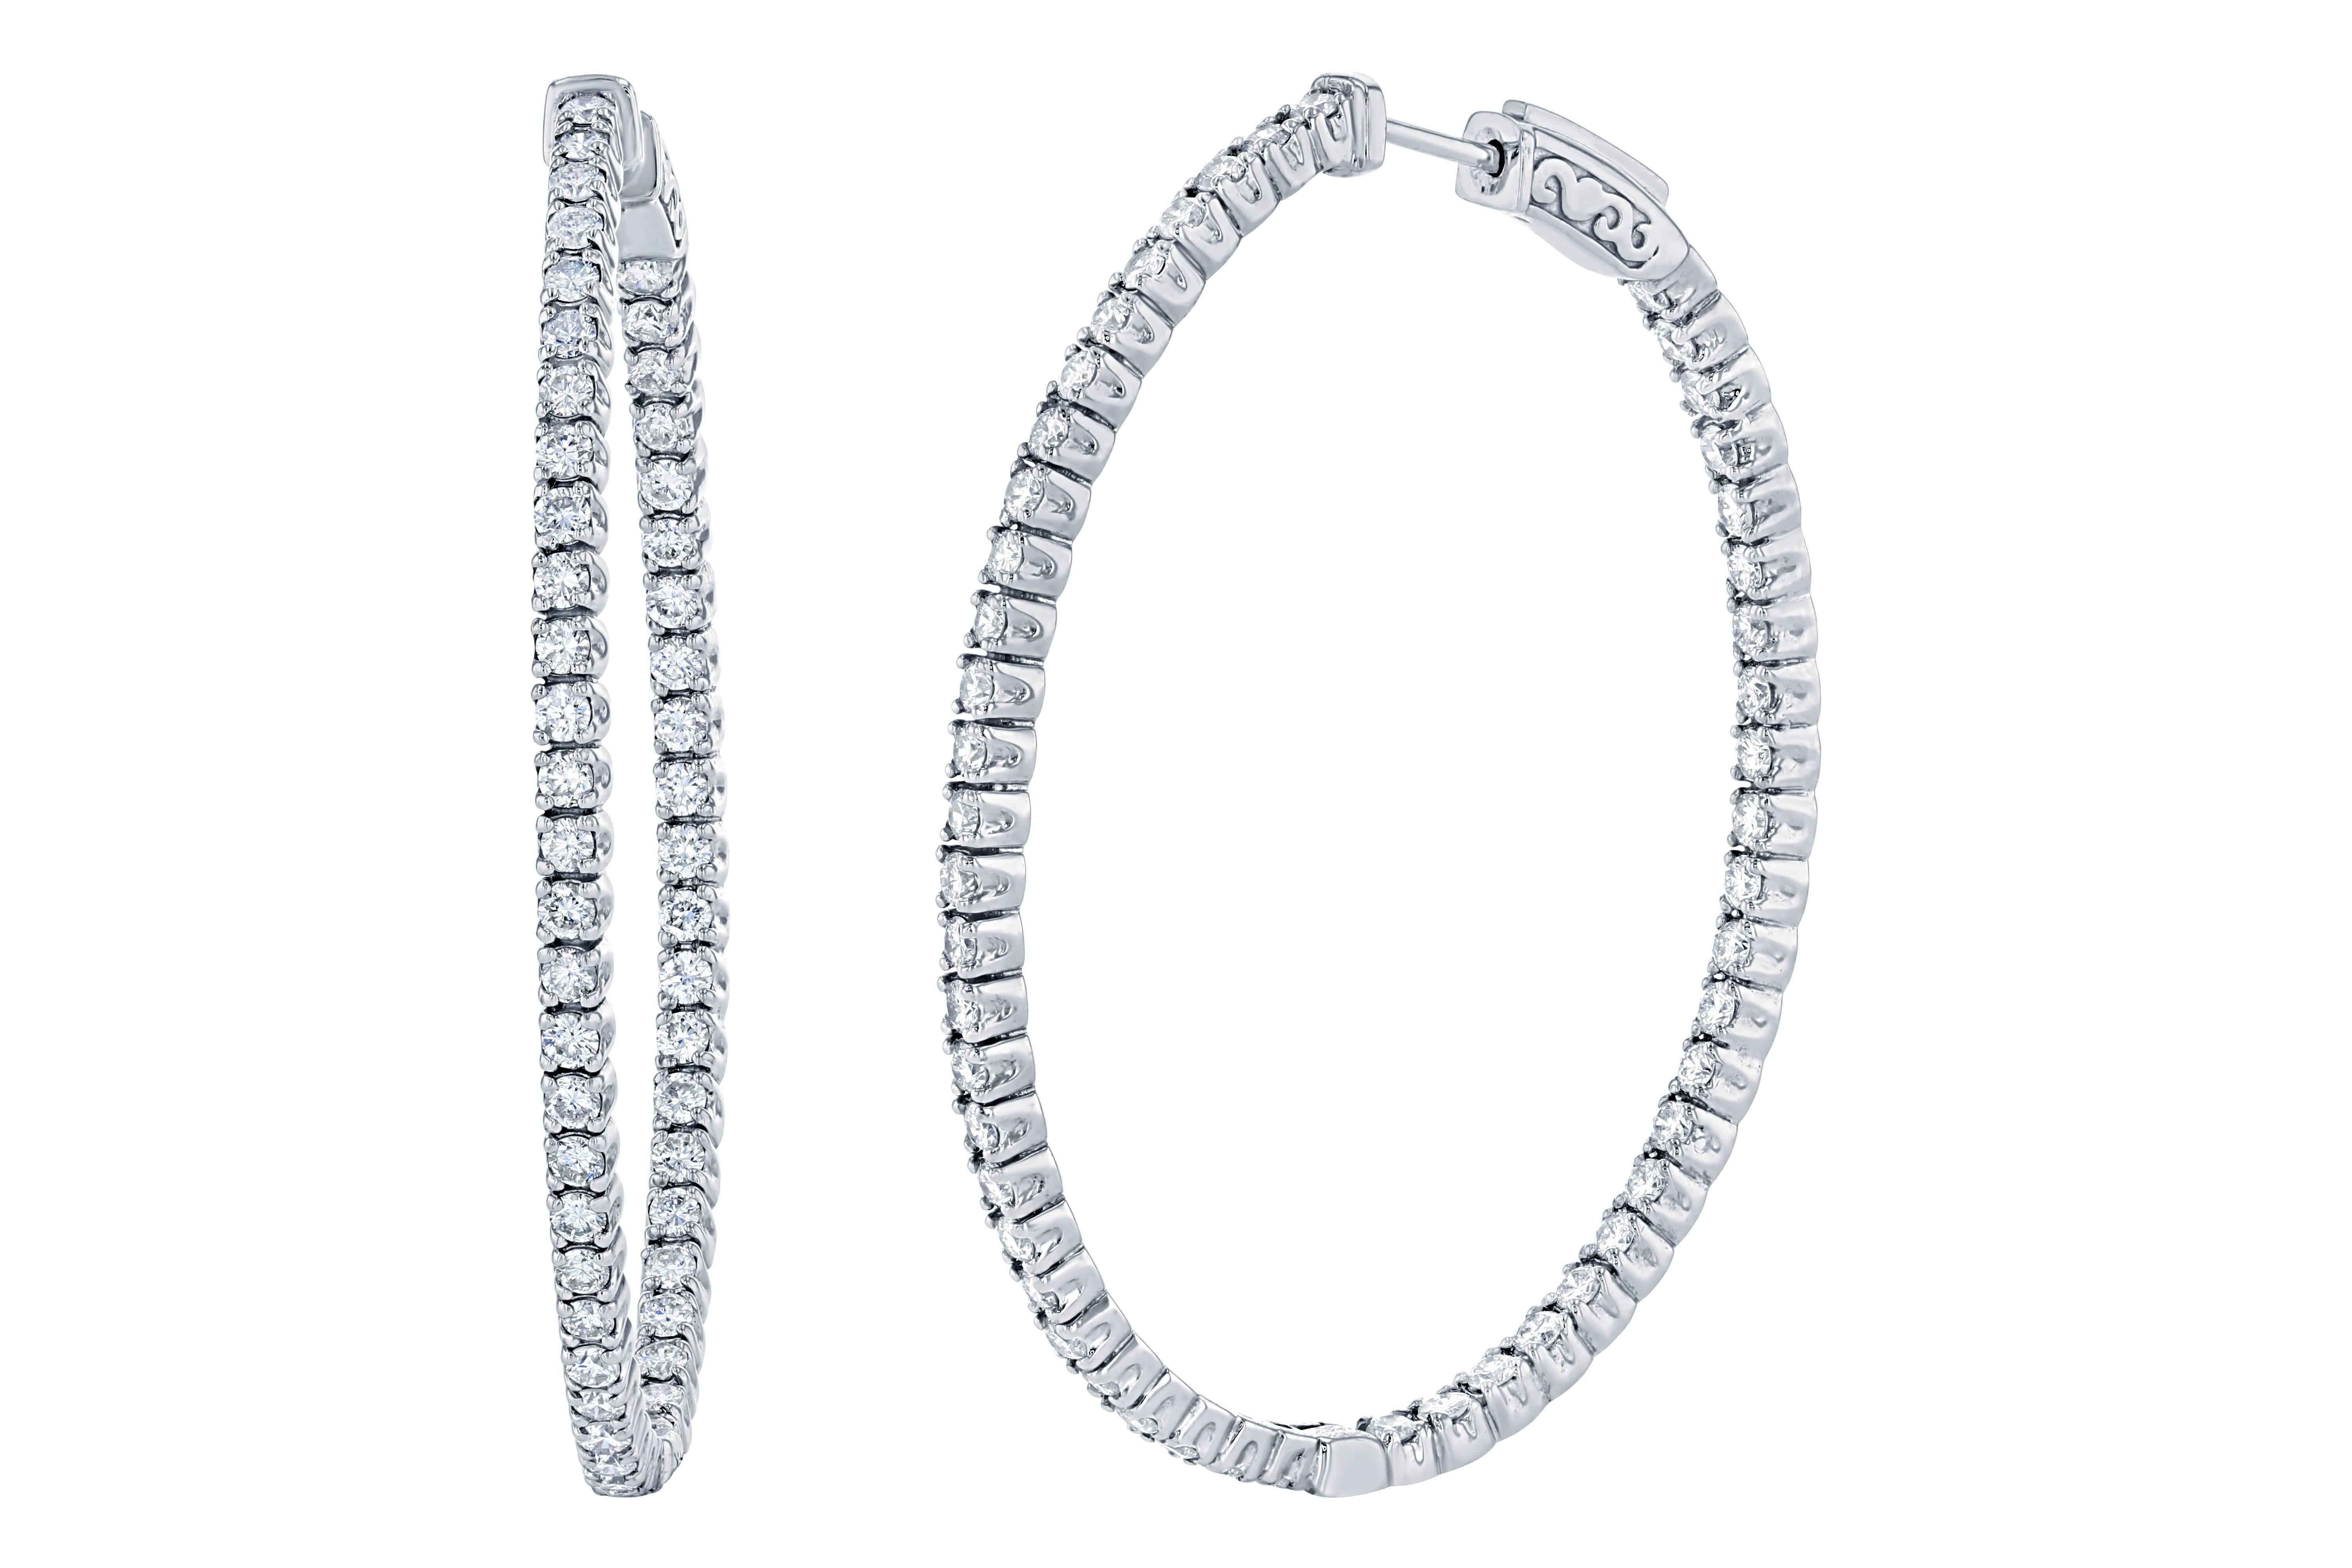 These stunning diamond hoops have diamonds set inside and out to give the piece symmetry and sparkle from all angles.  There are 100 Round Cut Diamonds that weigh 2.97 carats and they are made in 14K White Gold and weigh approximately 13.9 grams.